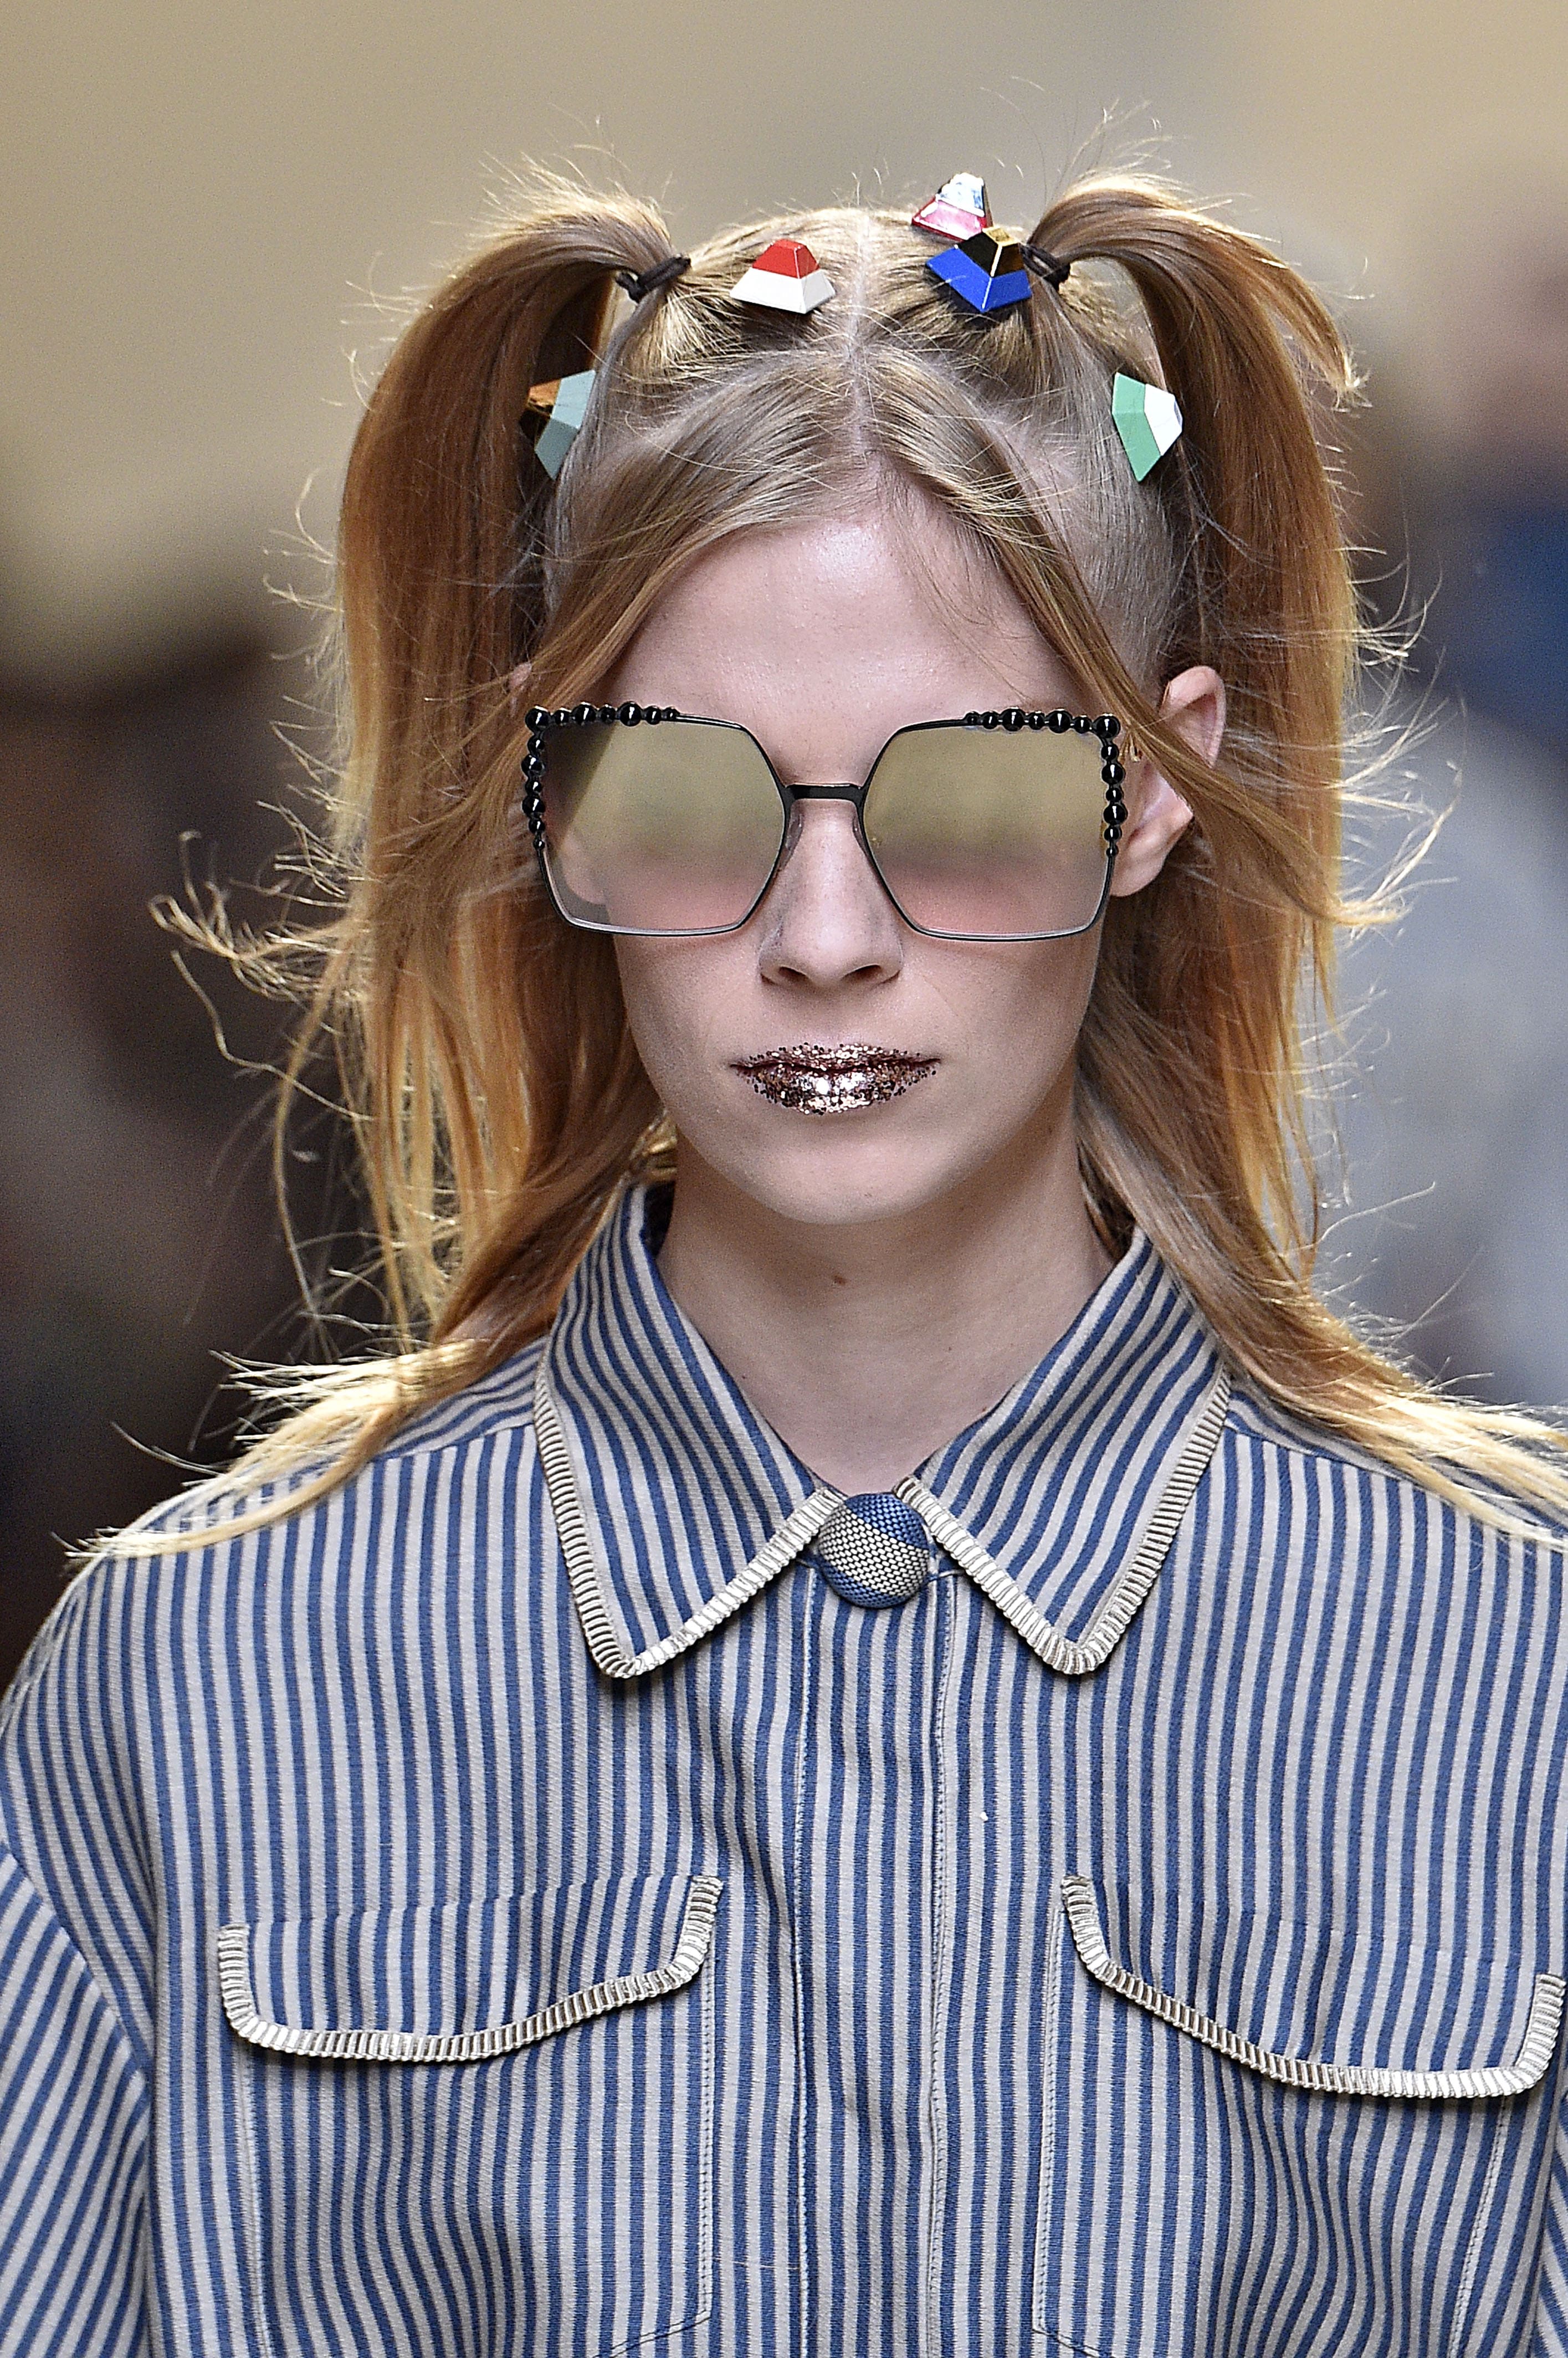 model on the Fendi SS17 runway with blonde hair worn in pigtails with candy look accessories attached and glitter lips wearing a striped outfit